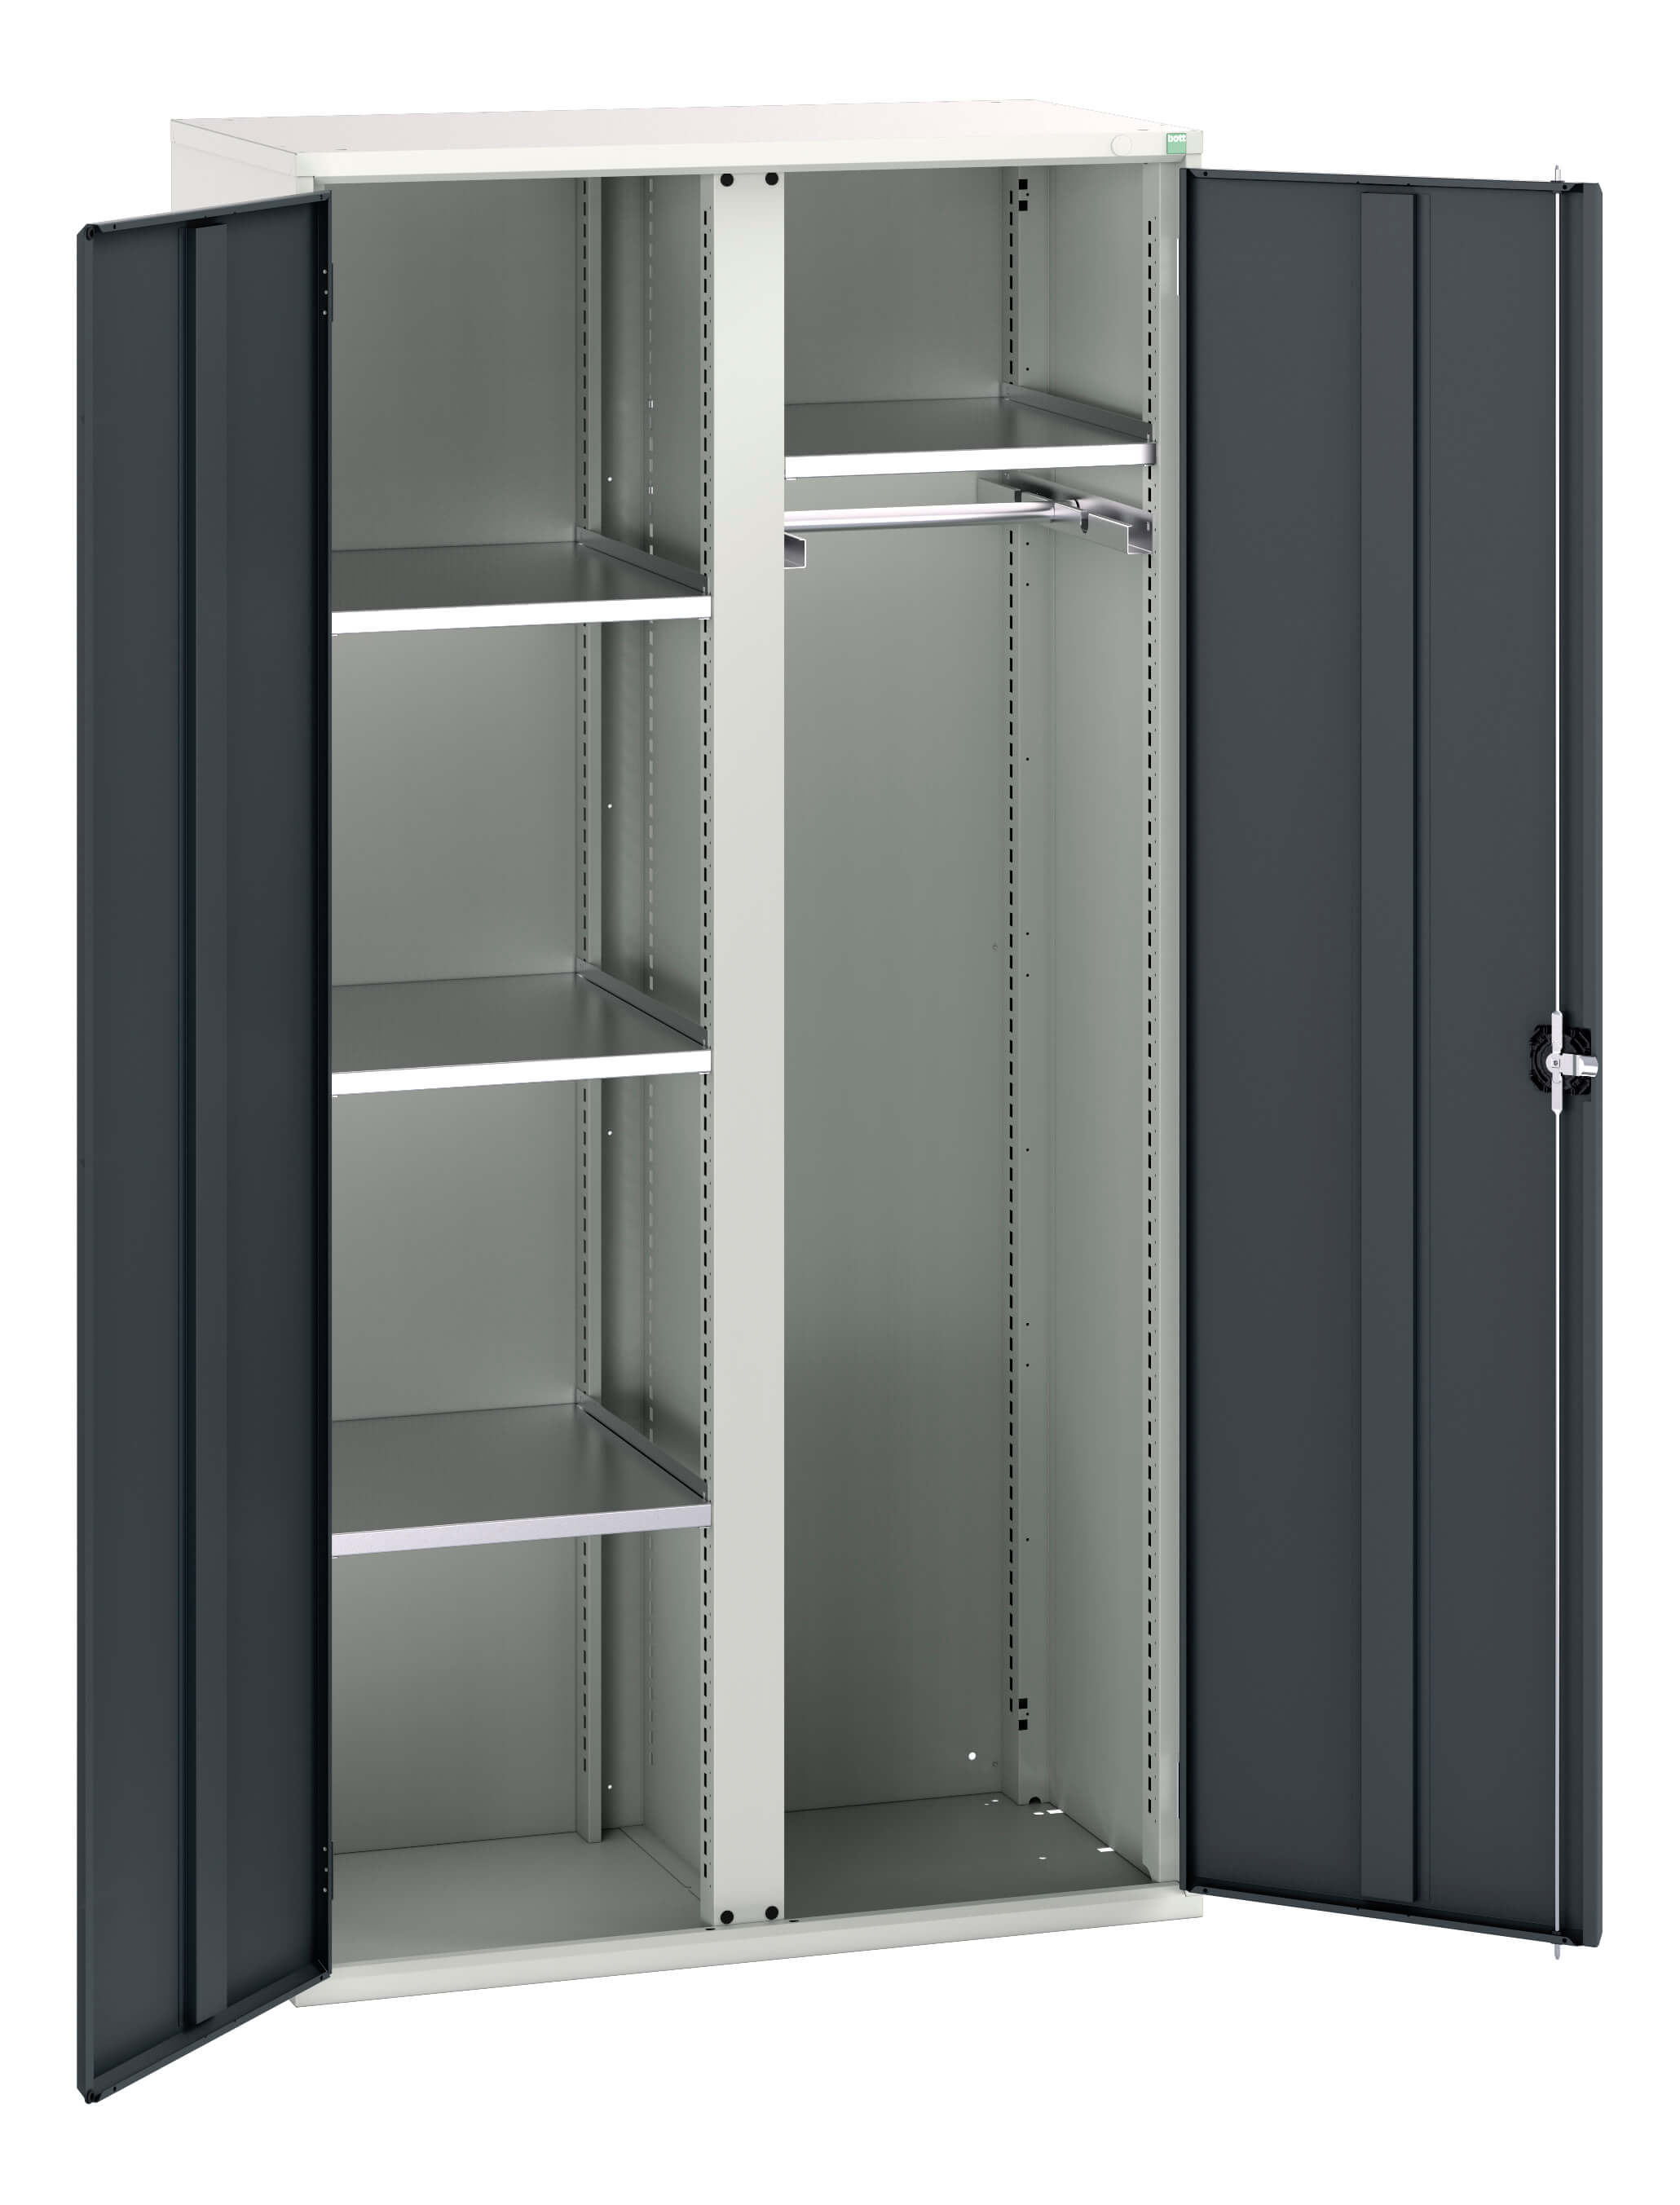 Bott Verso Ppe / Janitorial Kitted Cupboard With Vertical Partition - 16926579.19